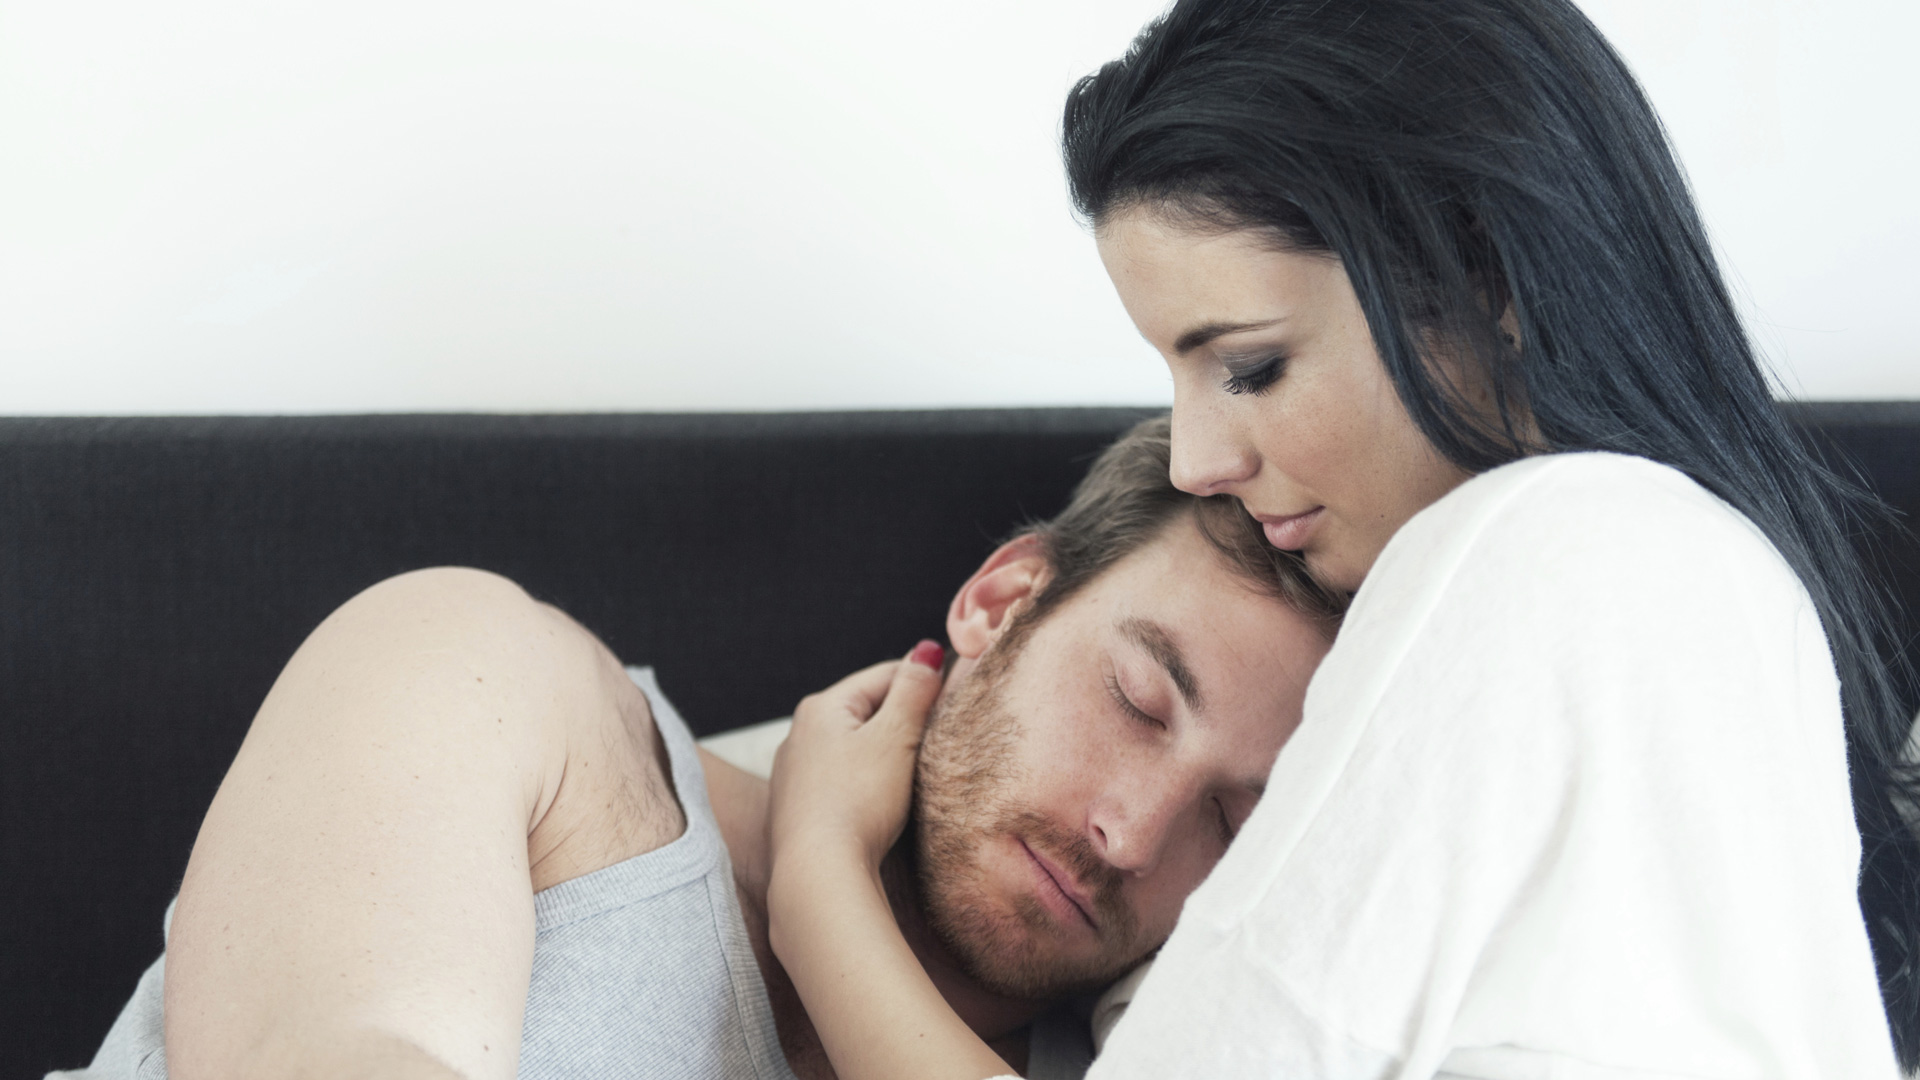 15 Ways to Make Your Man Feel Special